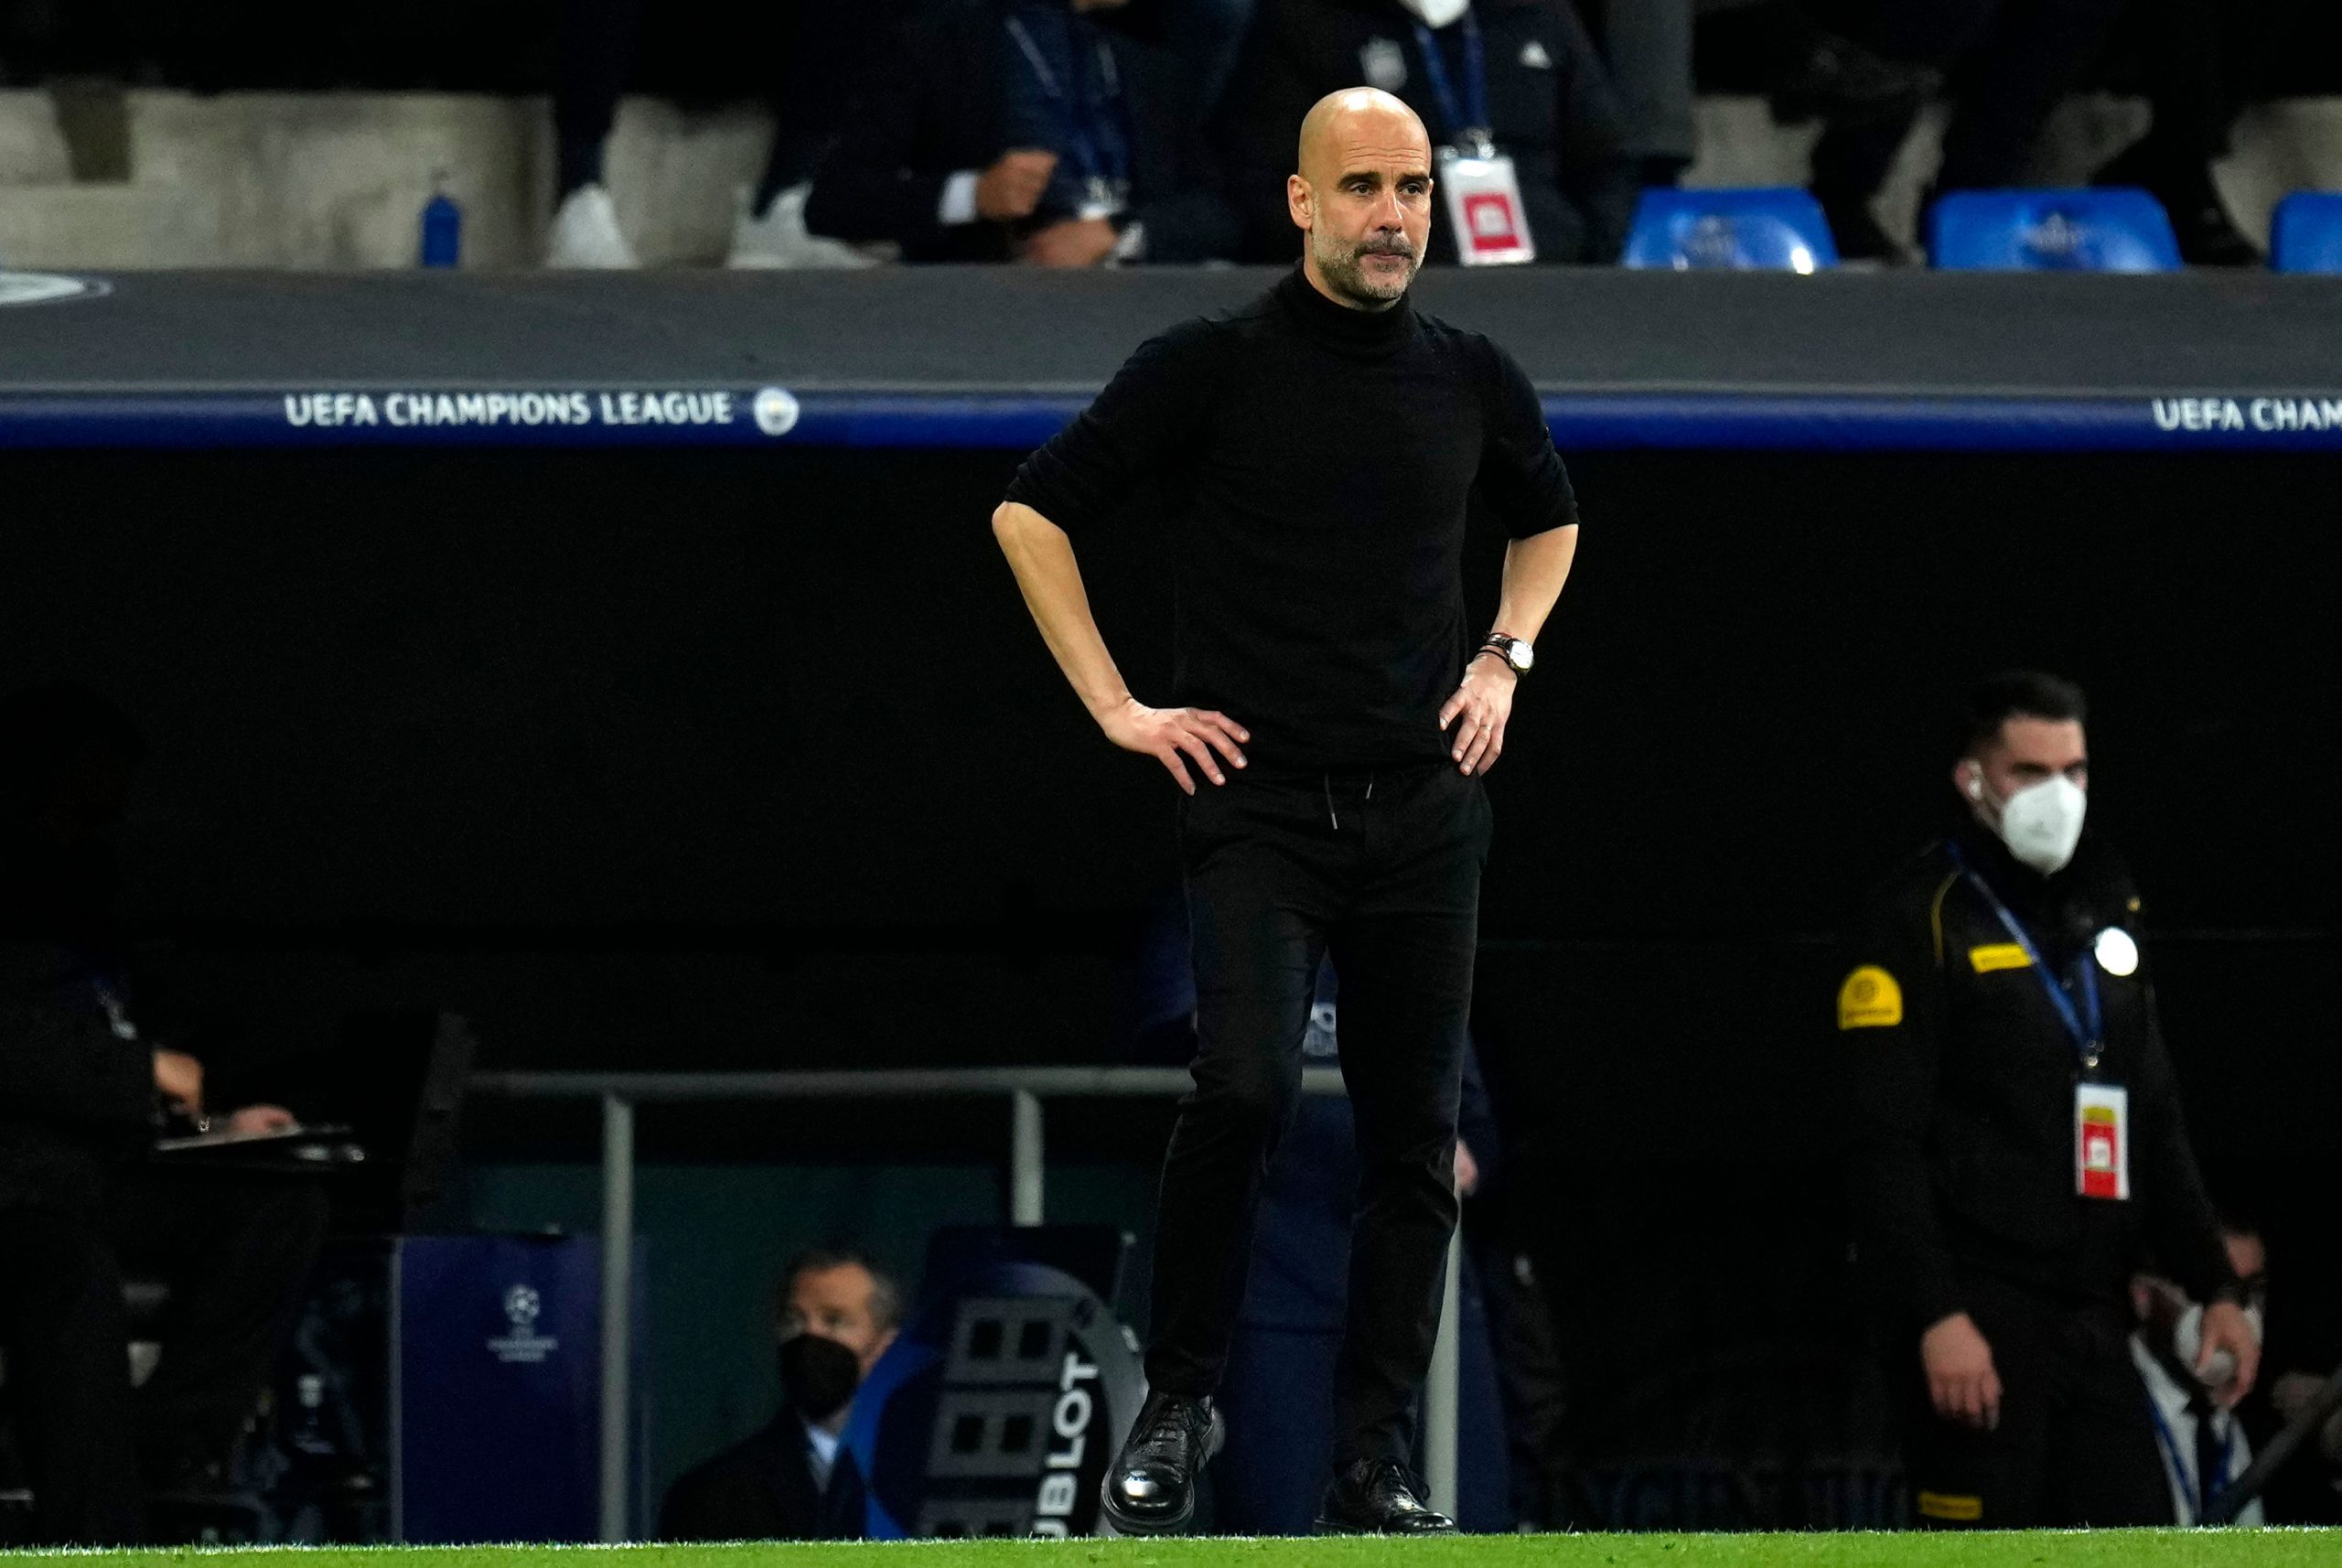 Dusted in Europe, Guardiola’s Man City move to Premier League challenge